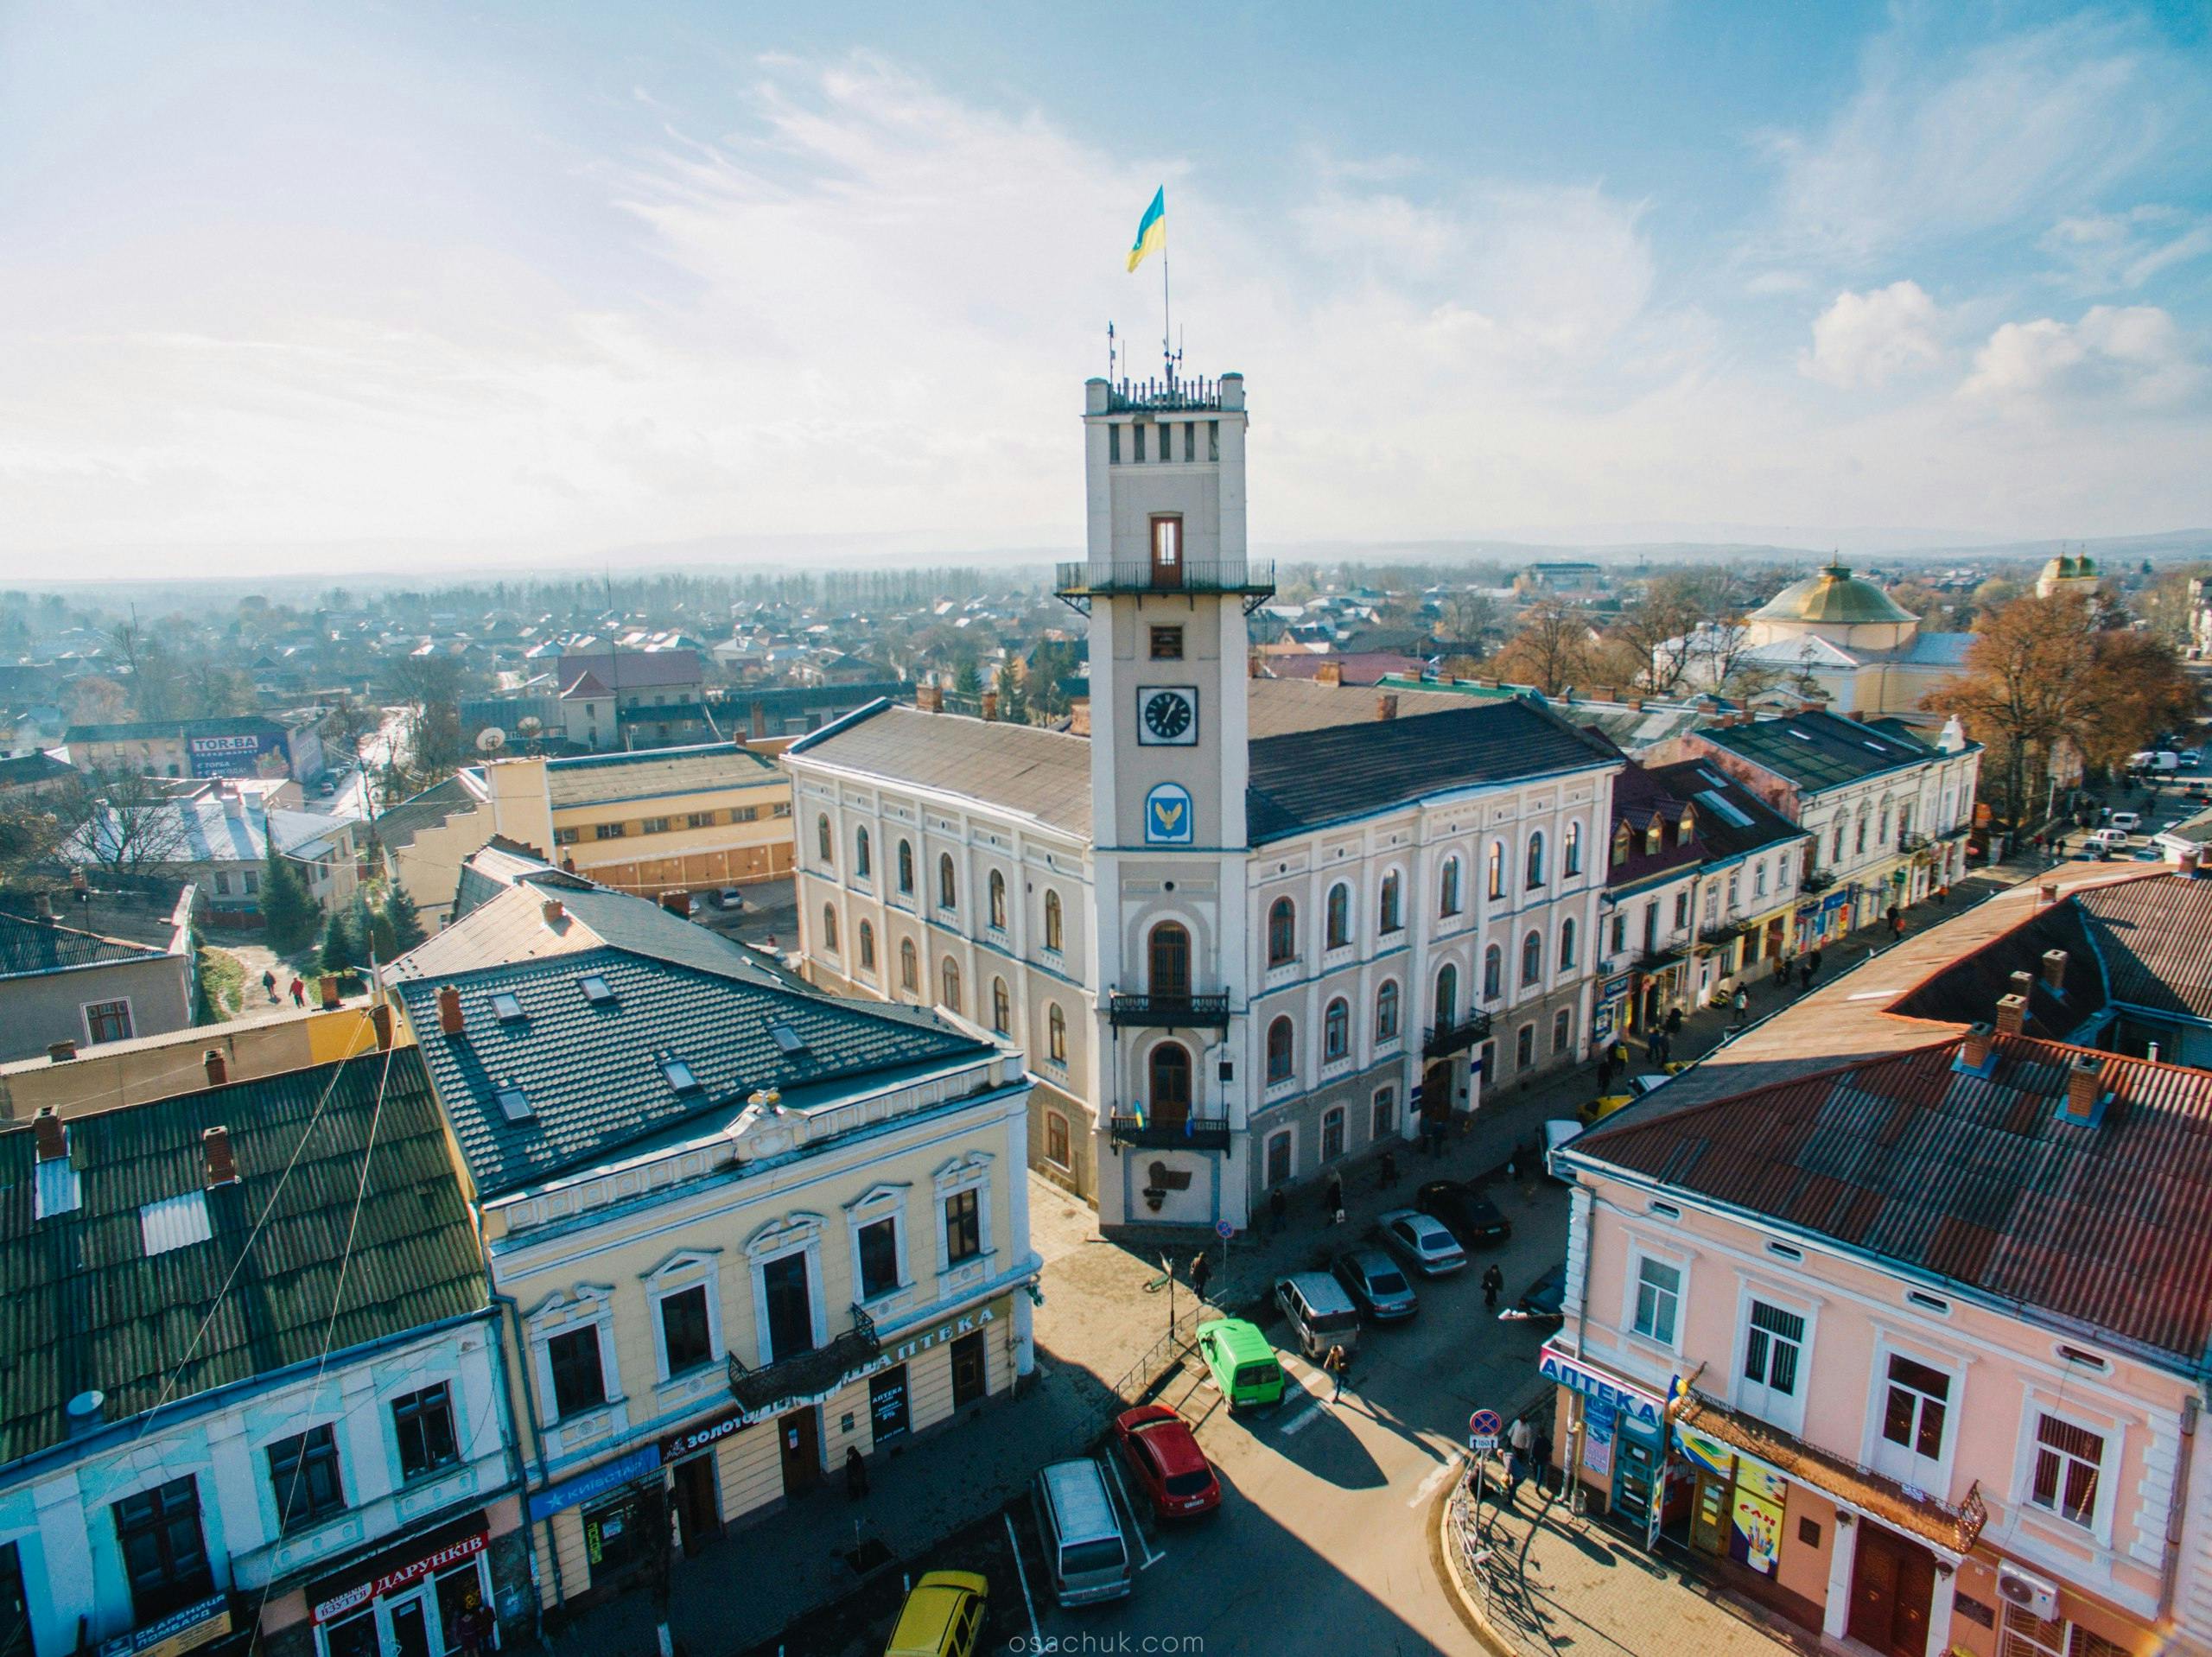 The picture shows the city of Kolomyia